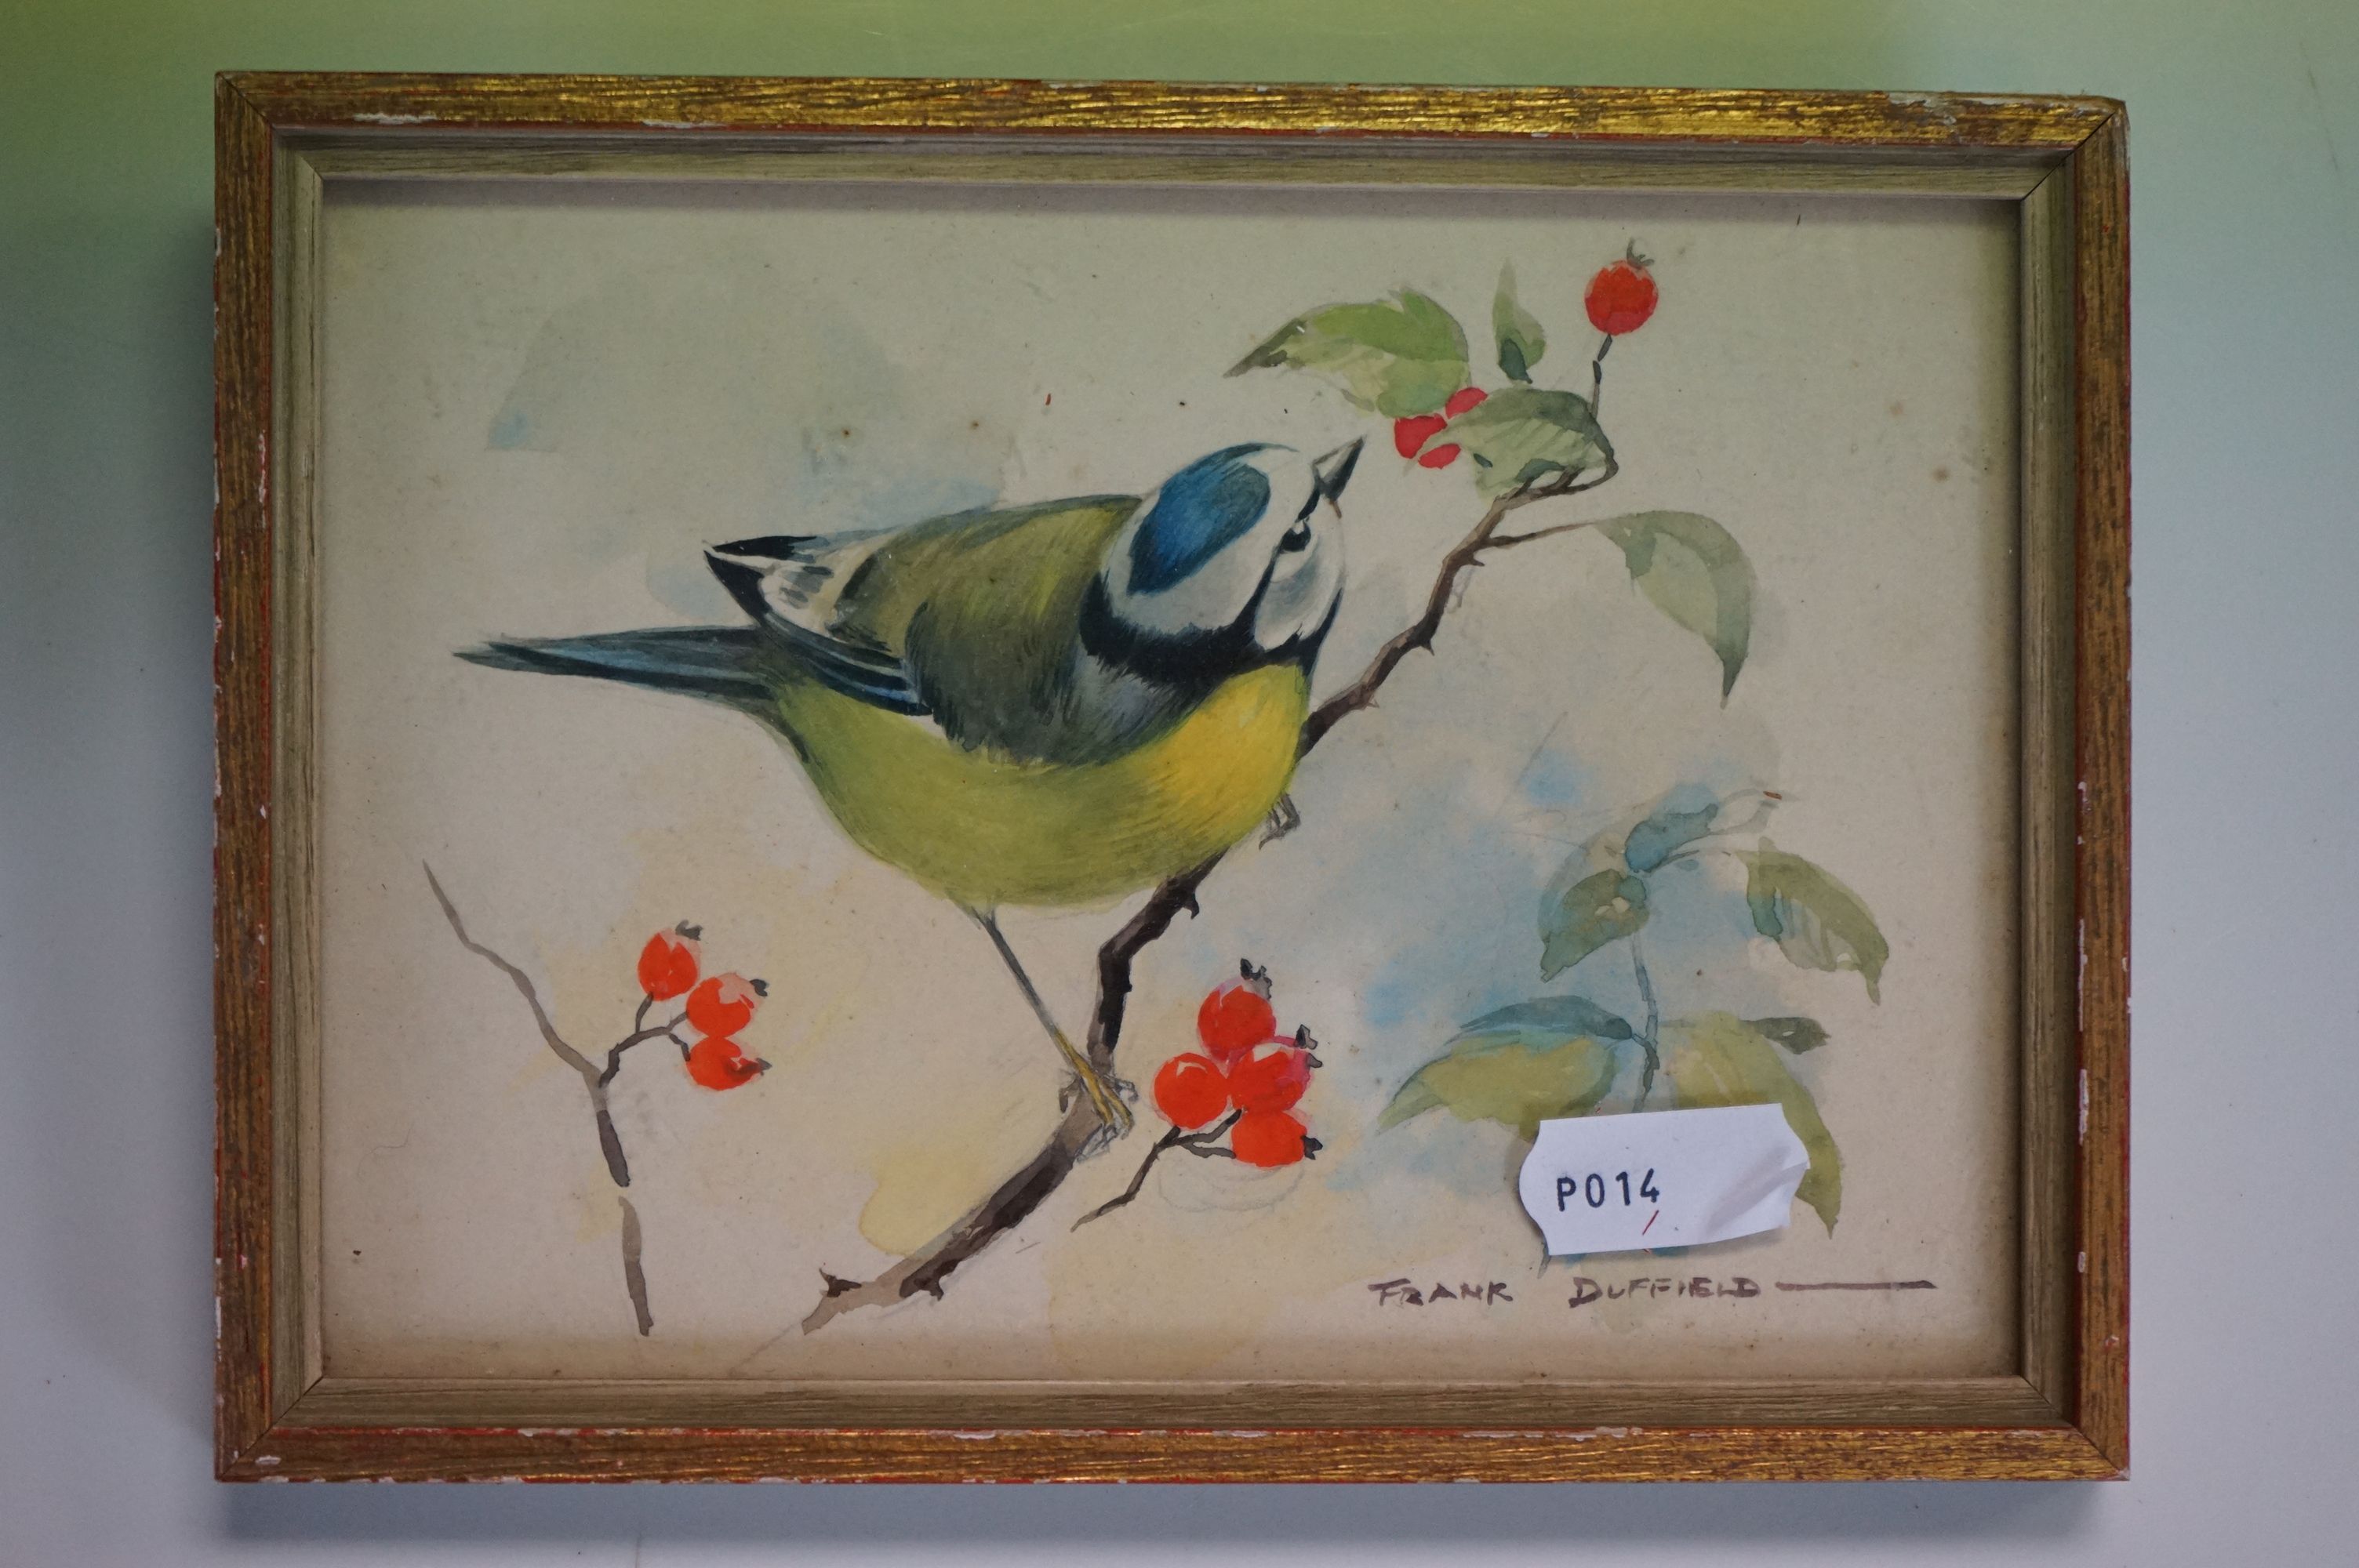 Frank Duffield (1901 - 1982 Bristol Savages), Collection of Seven Small Watercolours including Birds - Image 2 of 12